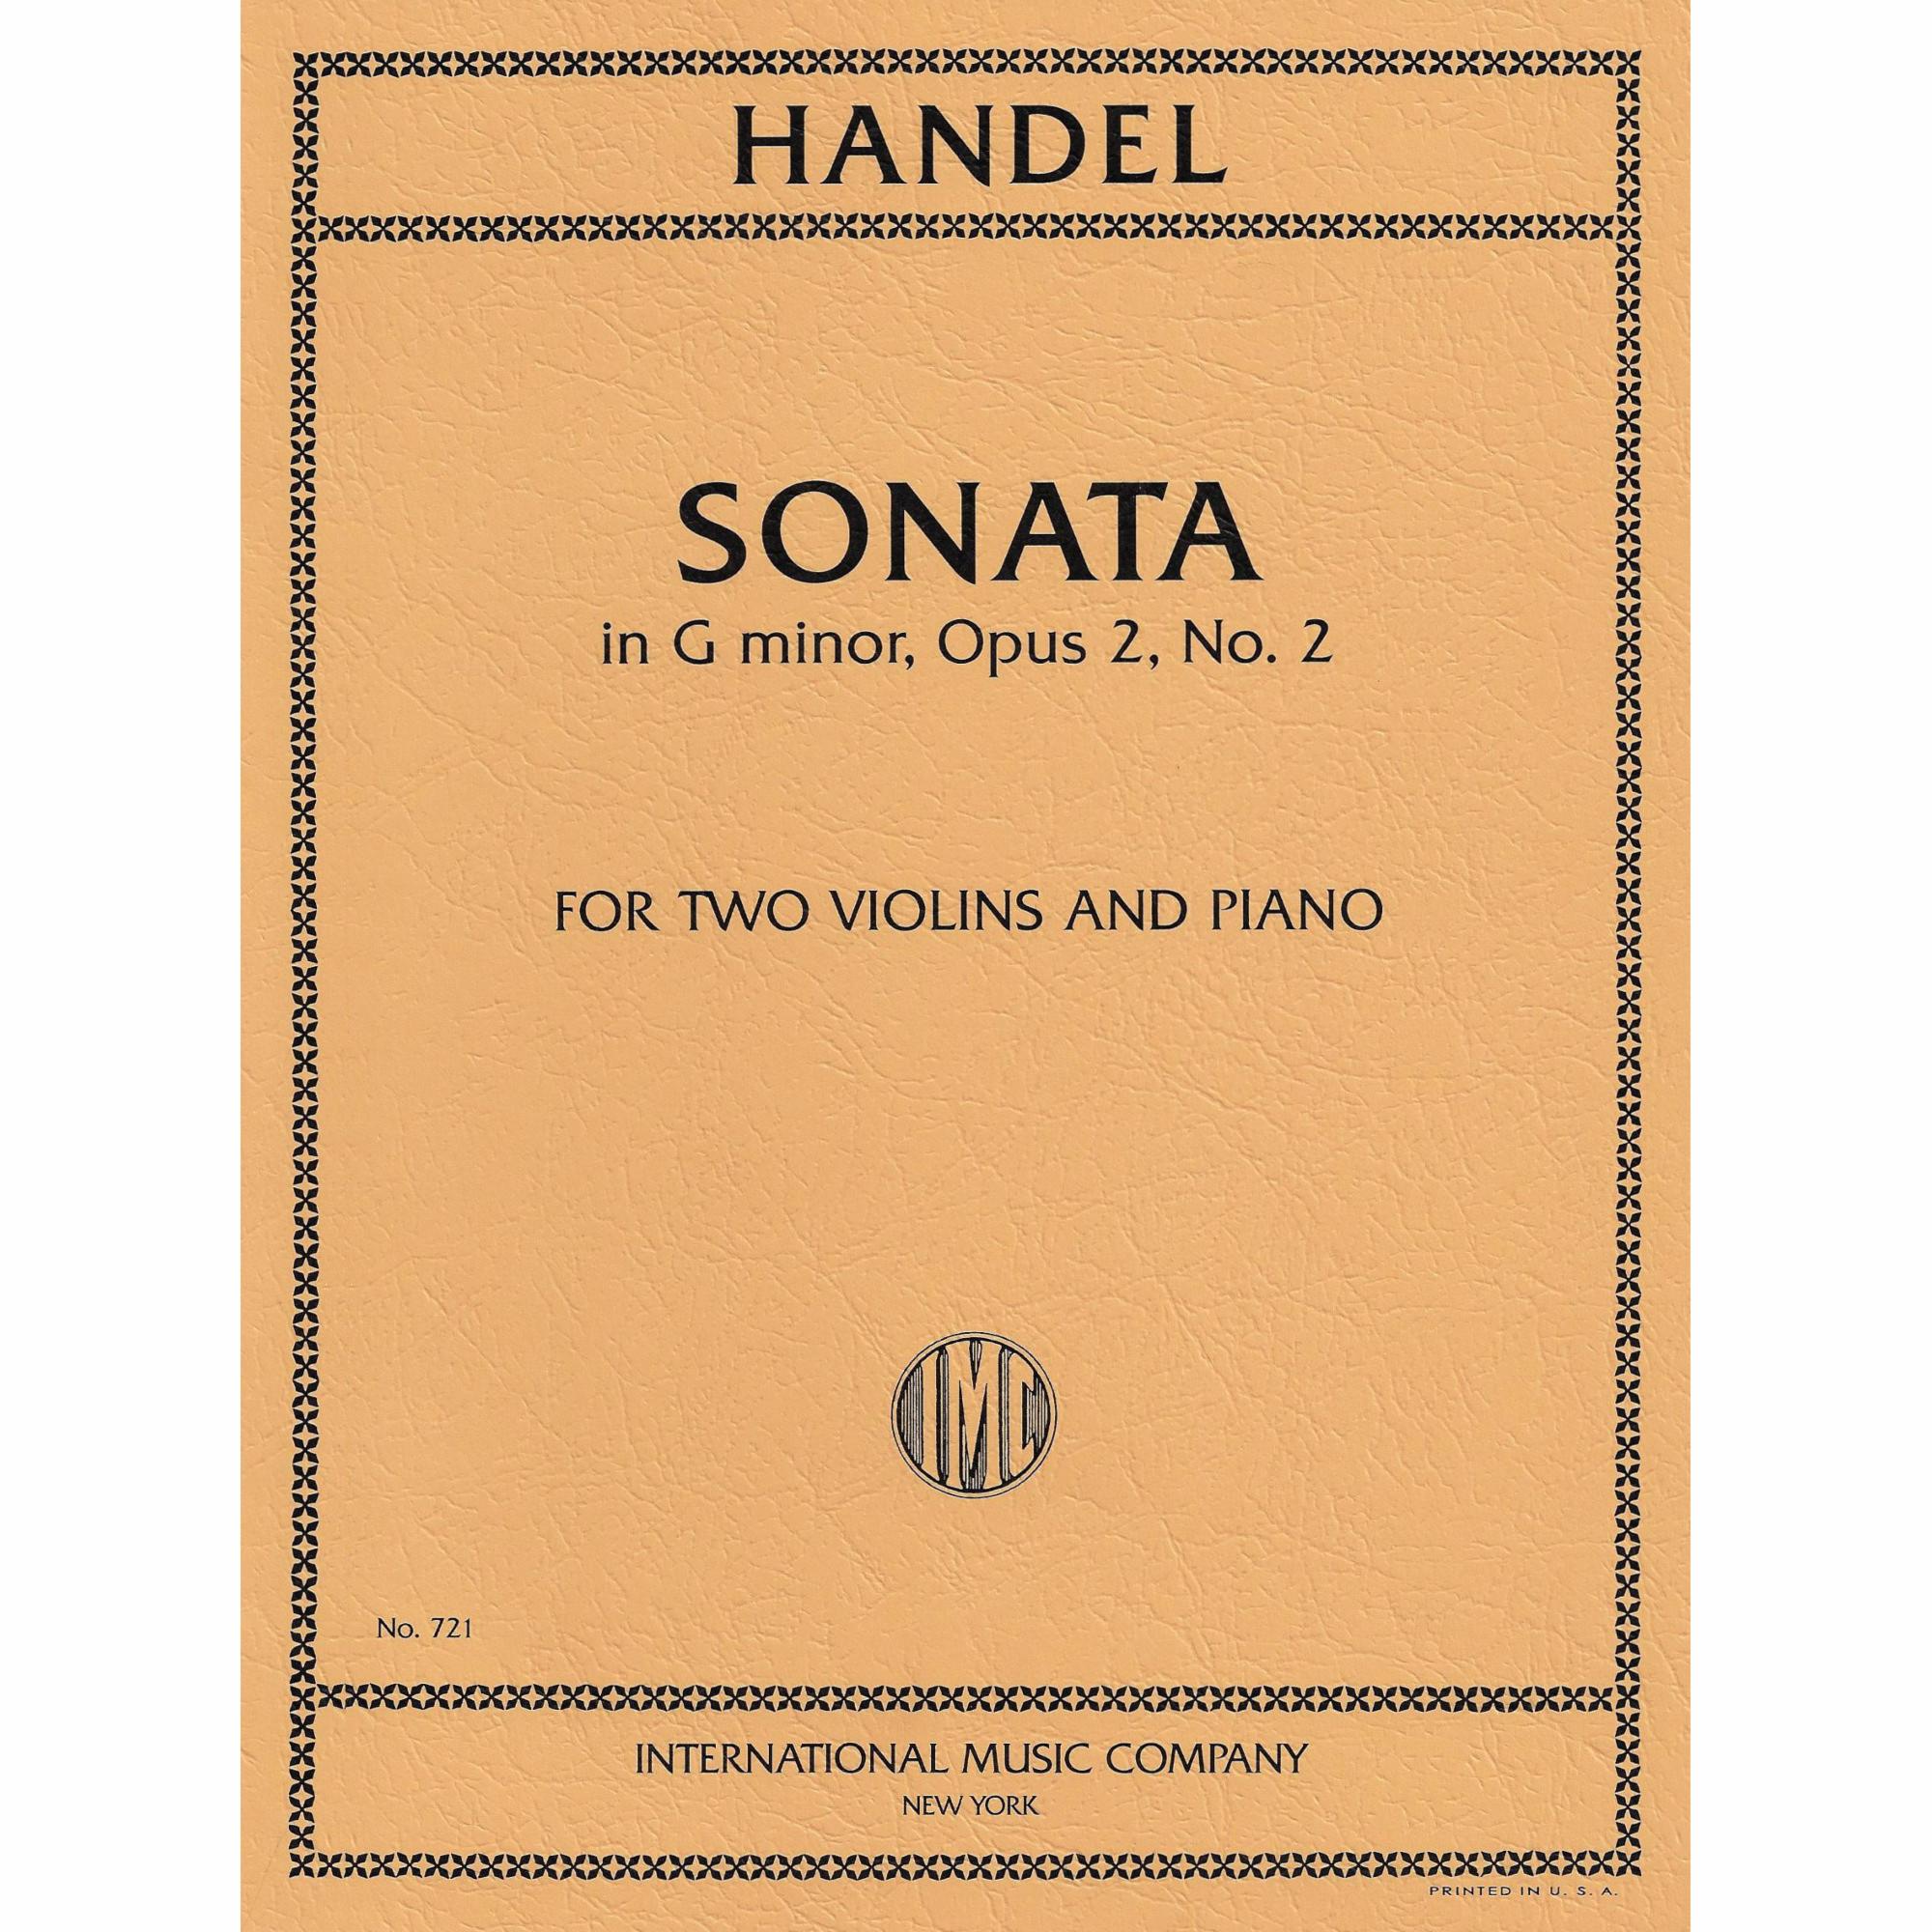 Handel -- Sonata in G Minor, Op. 2, No. 2 for Two Violins and Piano